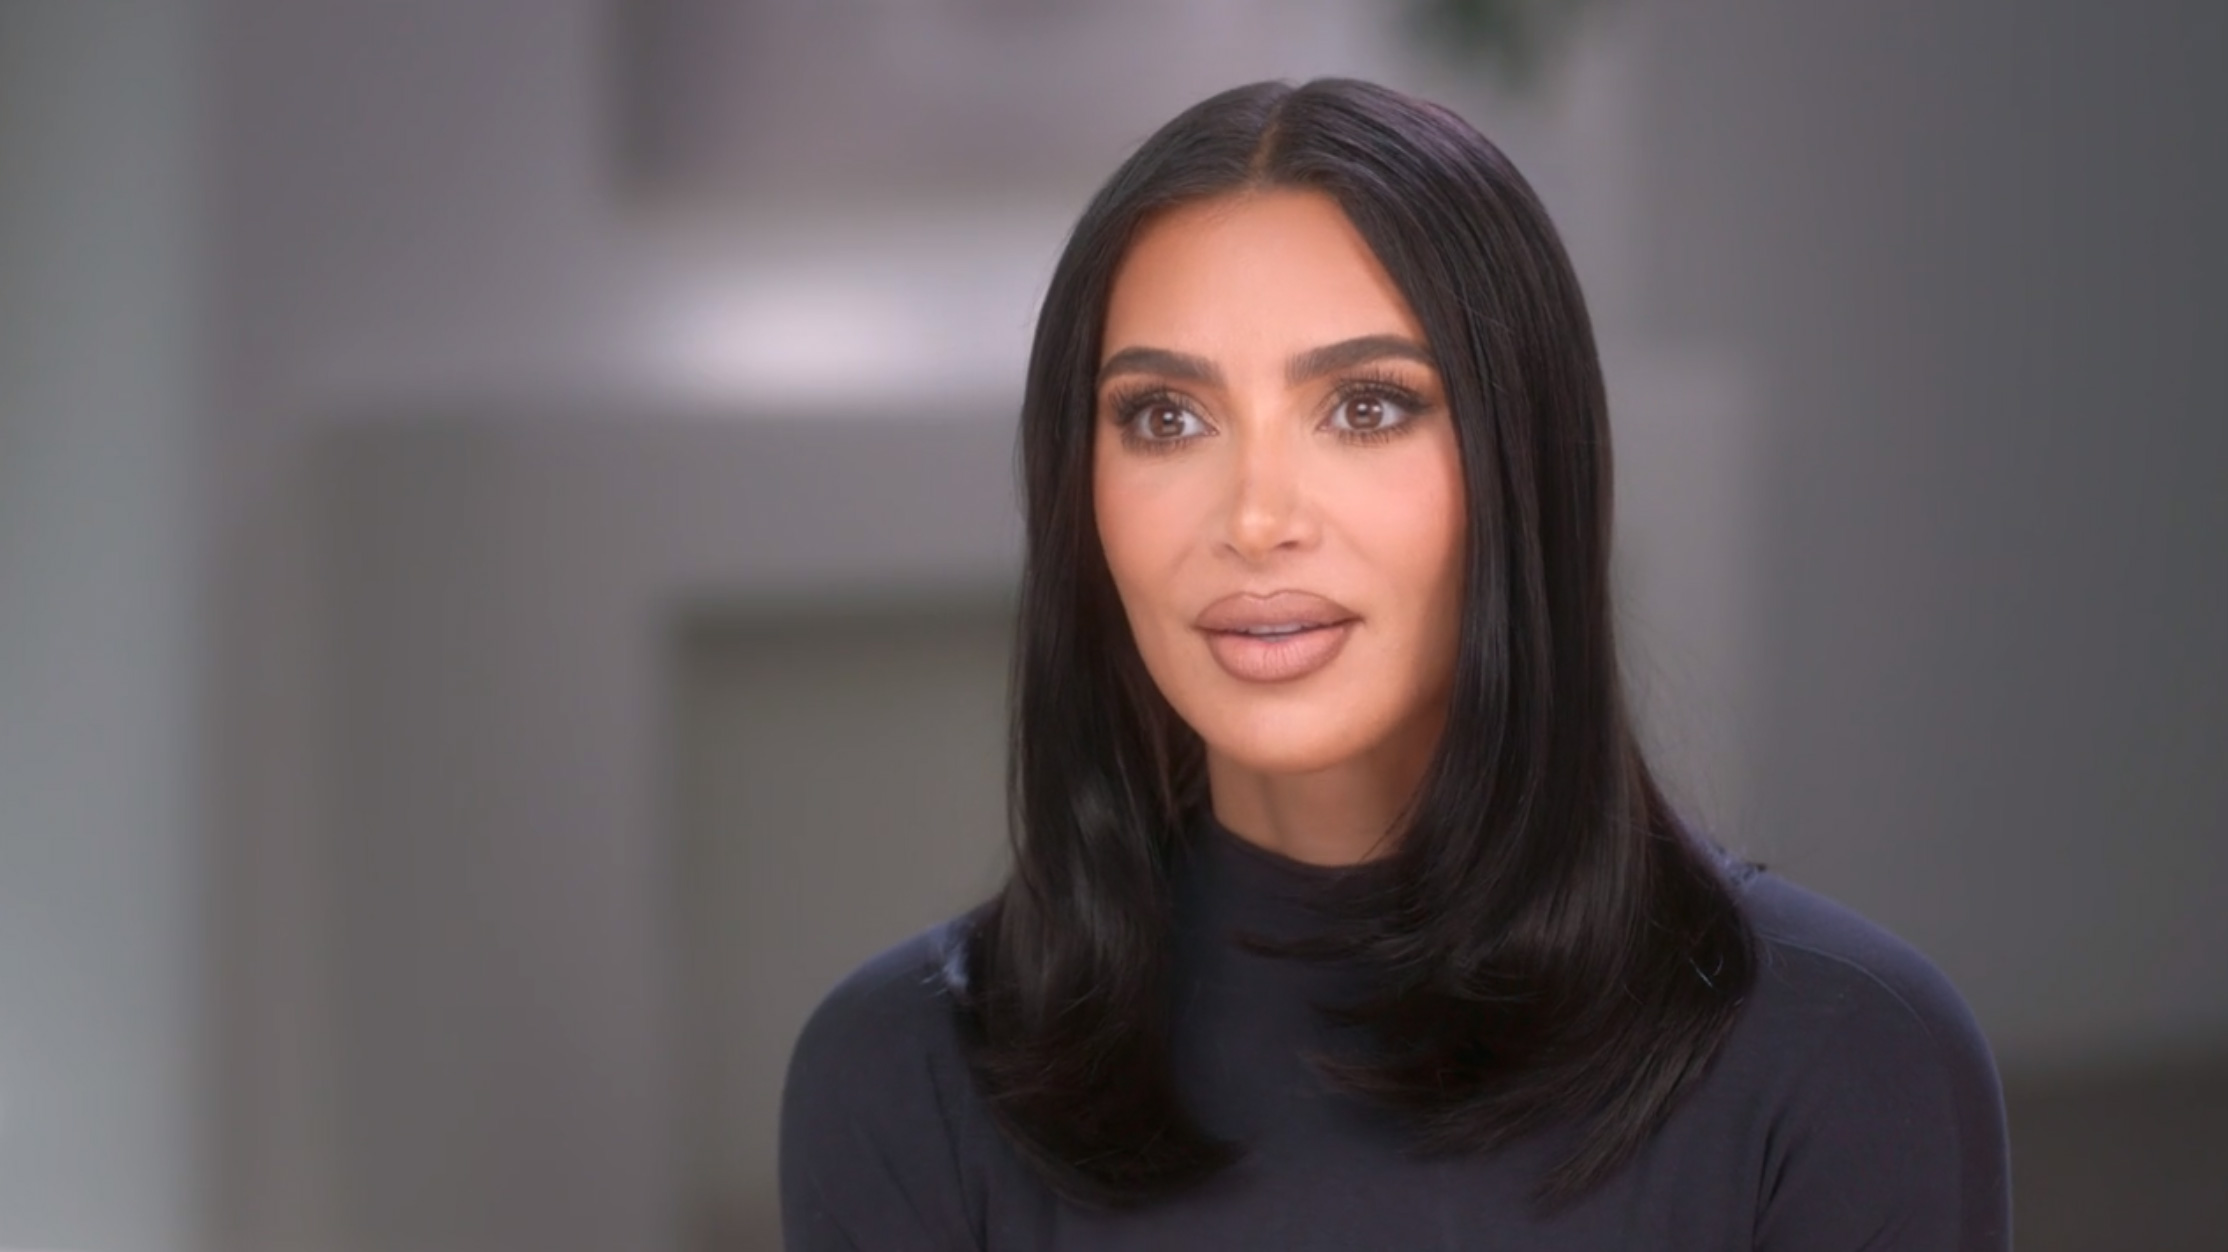 Fans claimed Kim Kardashian had a facelift after checking out her barefaced look